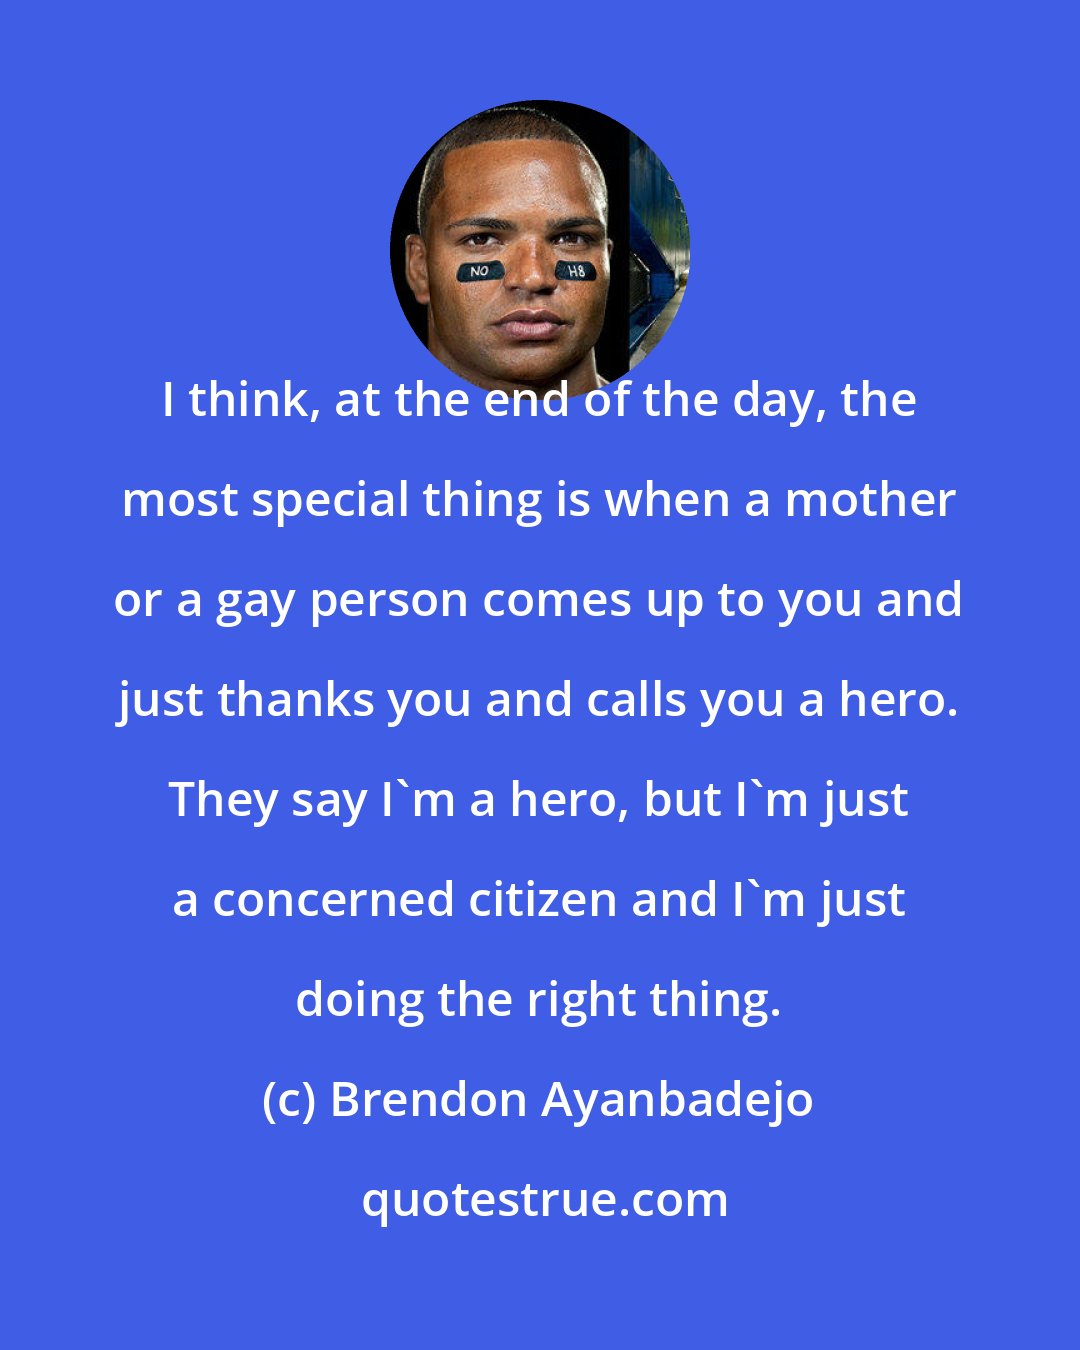 Brendon Ayanbadejo: I think, at the end of the day, the most special thing is when a mother or a gay person comes up to you and just thanks you and calls you a hero. They say I'm a hero, but I'm just a concerned citizen and I'm just doing the right thing.